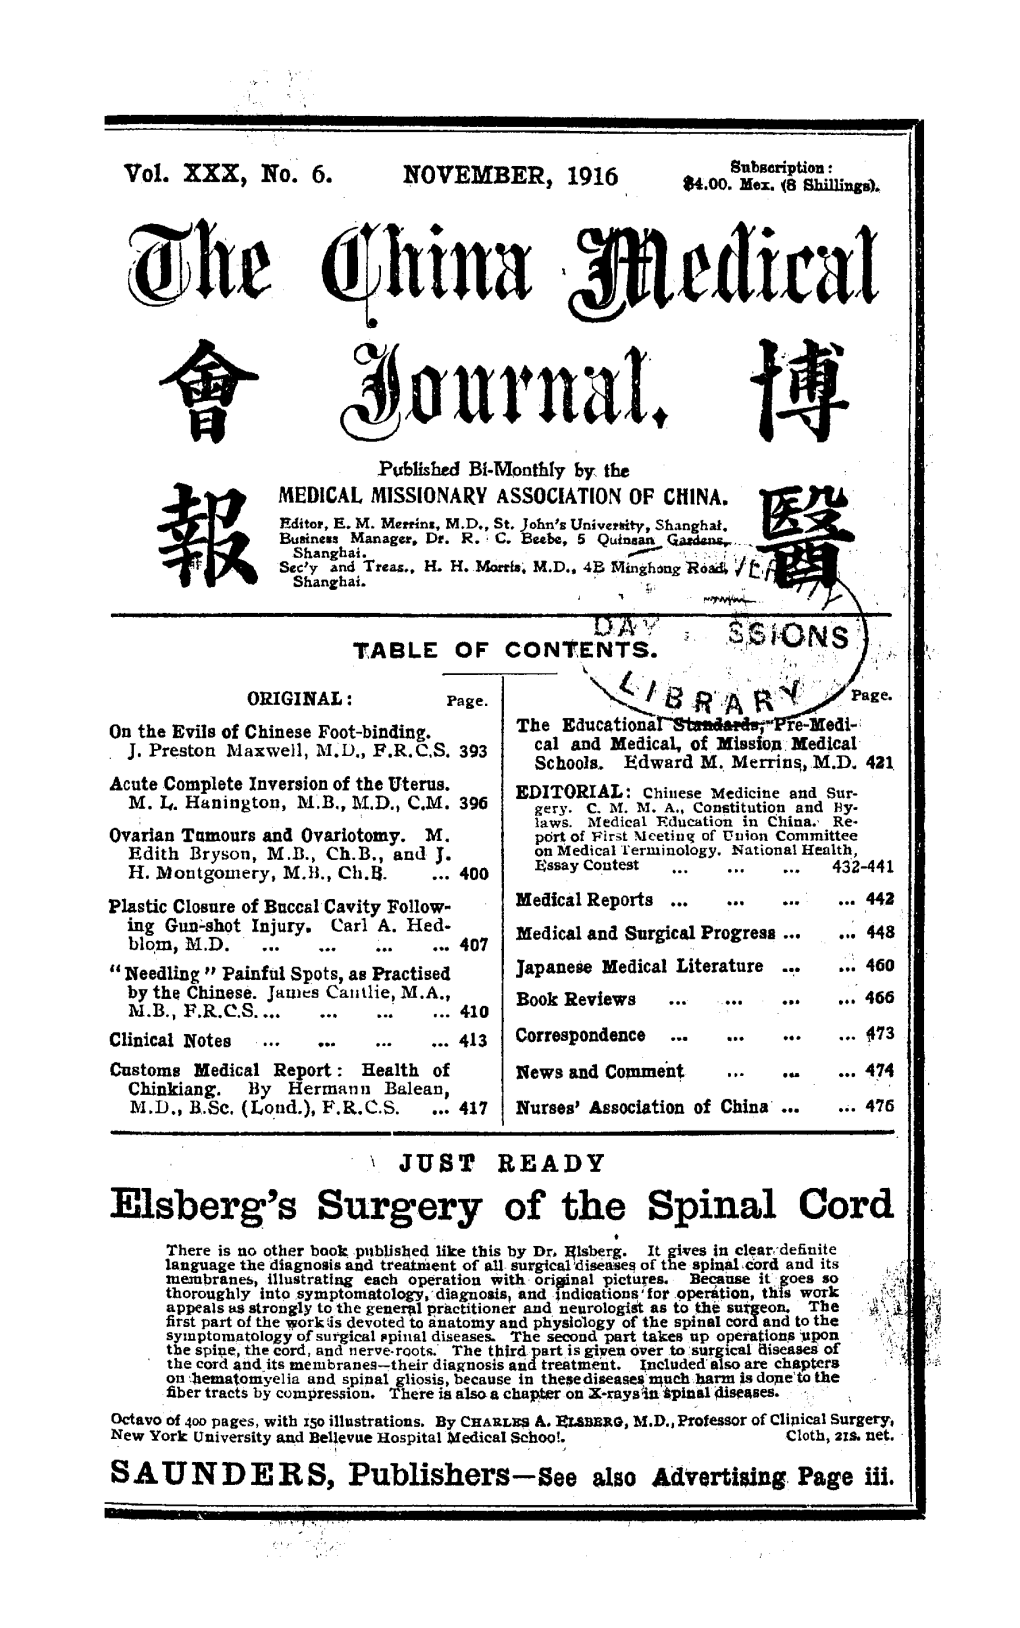 Elsberg's Surgery of the Spinal Cord